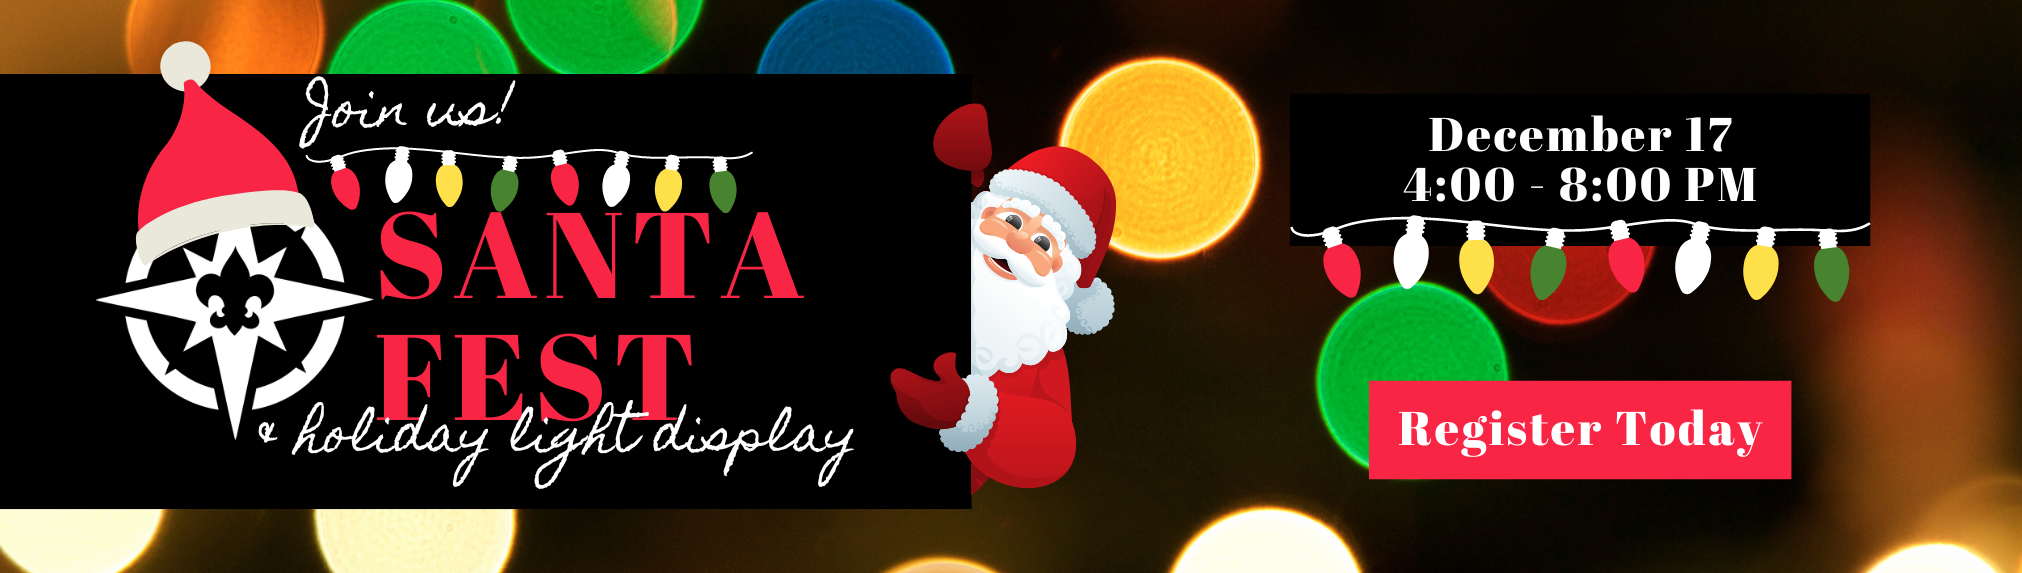 Join us for Santa Fest, happening December 17 from 4:00 p.m. to 8 p.m.!